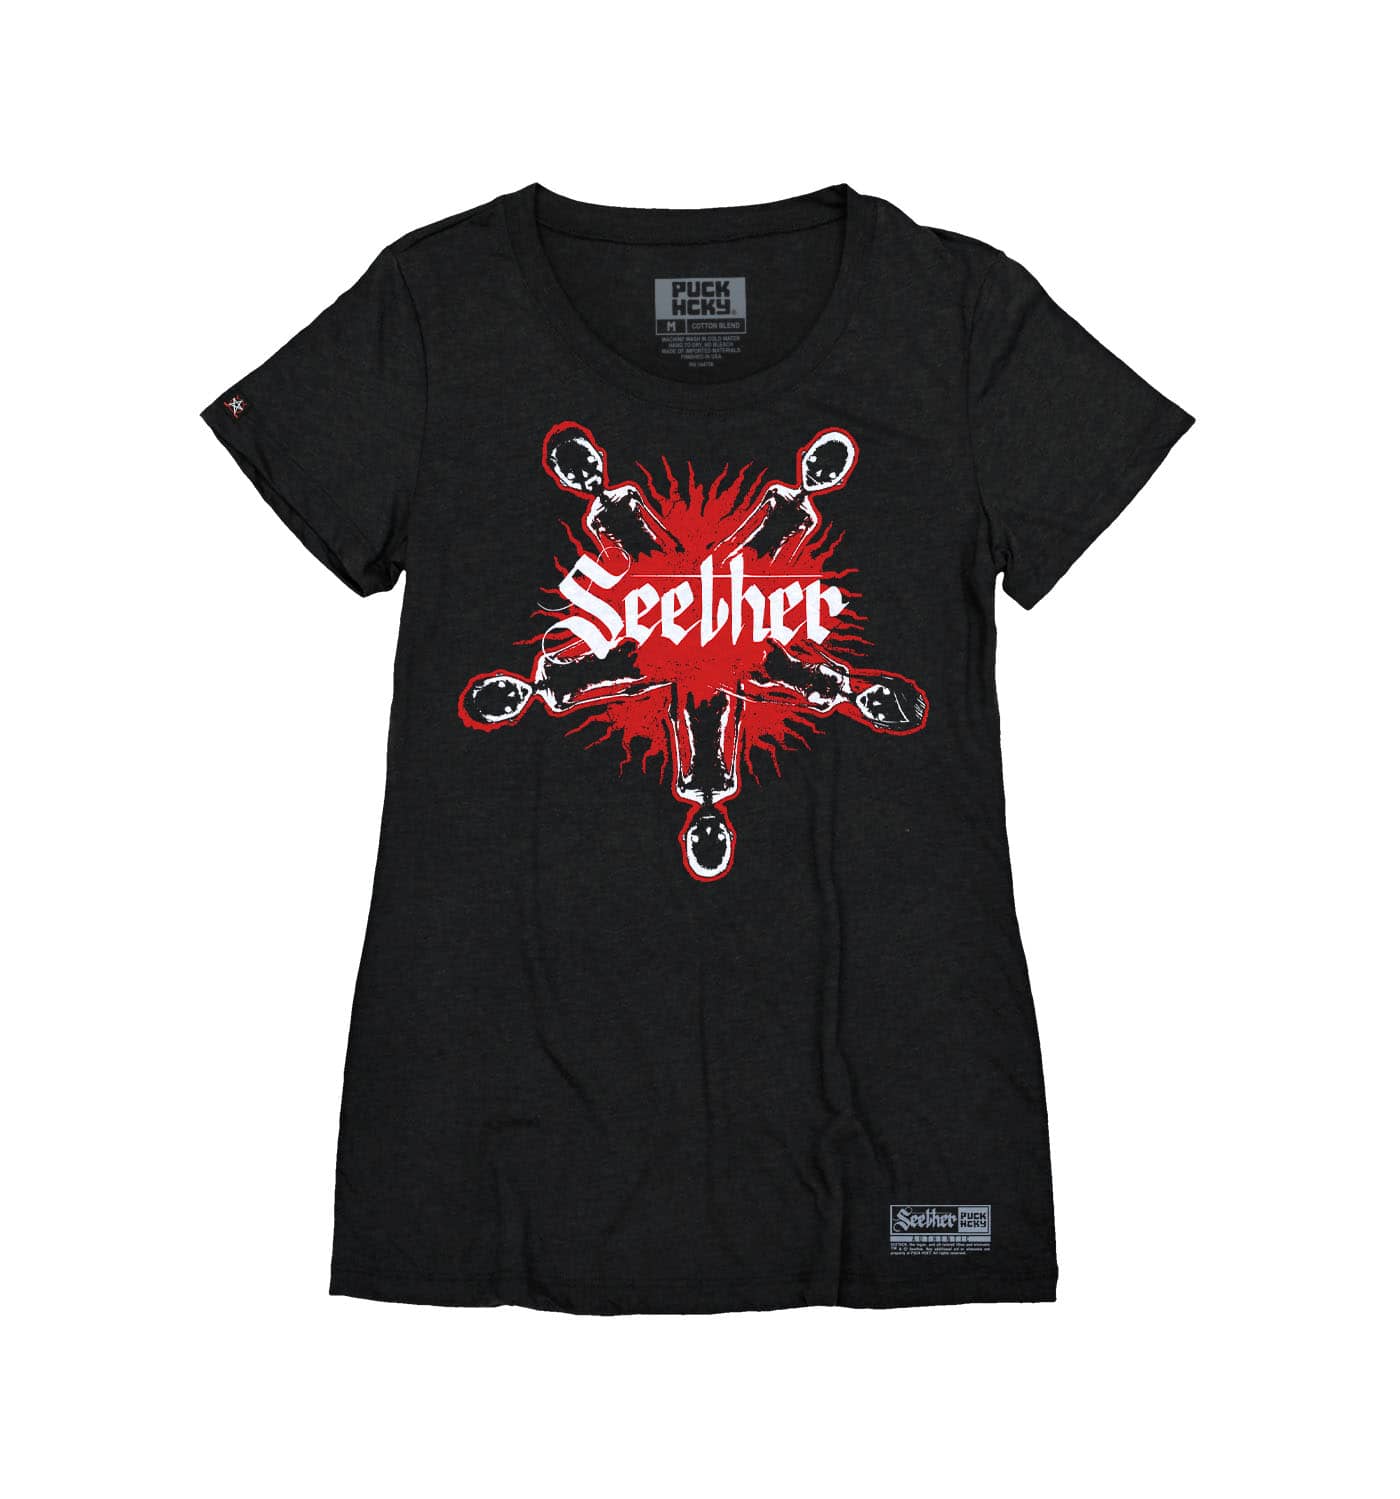 SEETHER ‘WASTELAND’ women's short sleeve hockey t-shirt in black front view